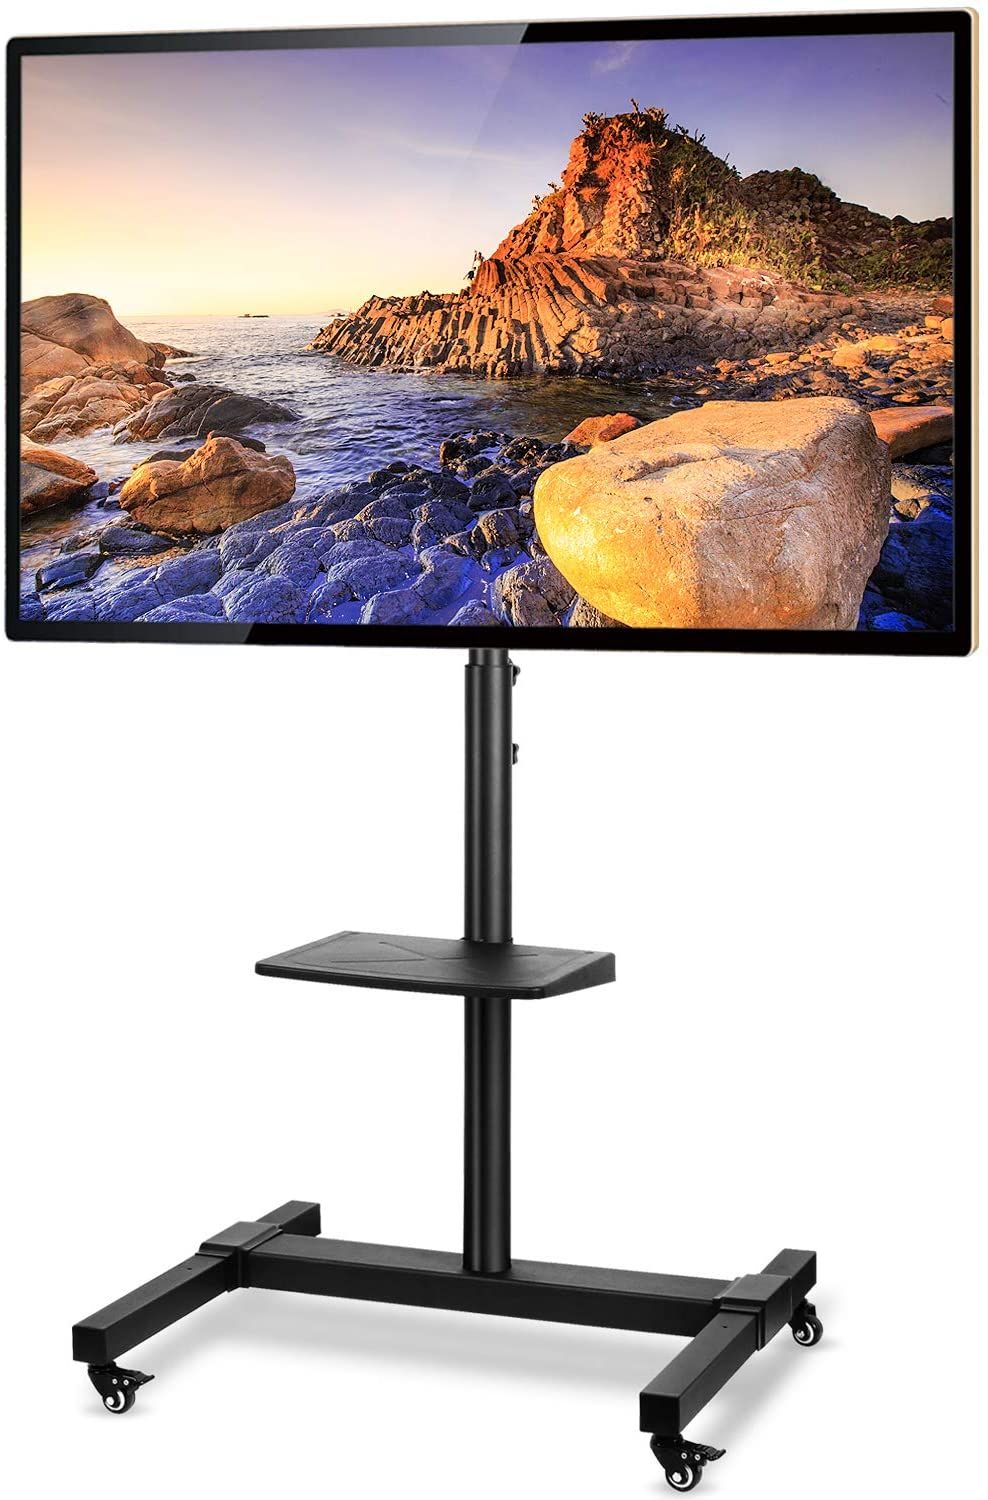 10 Best Rolling Tv Stands In 2020 | Unbiased Review In Rolling Tv Stands With Wheels With Adjustable Metal Shelf (Photo 13 of 15)